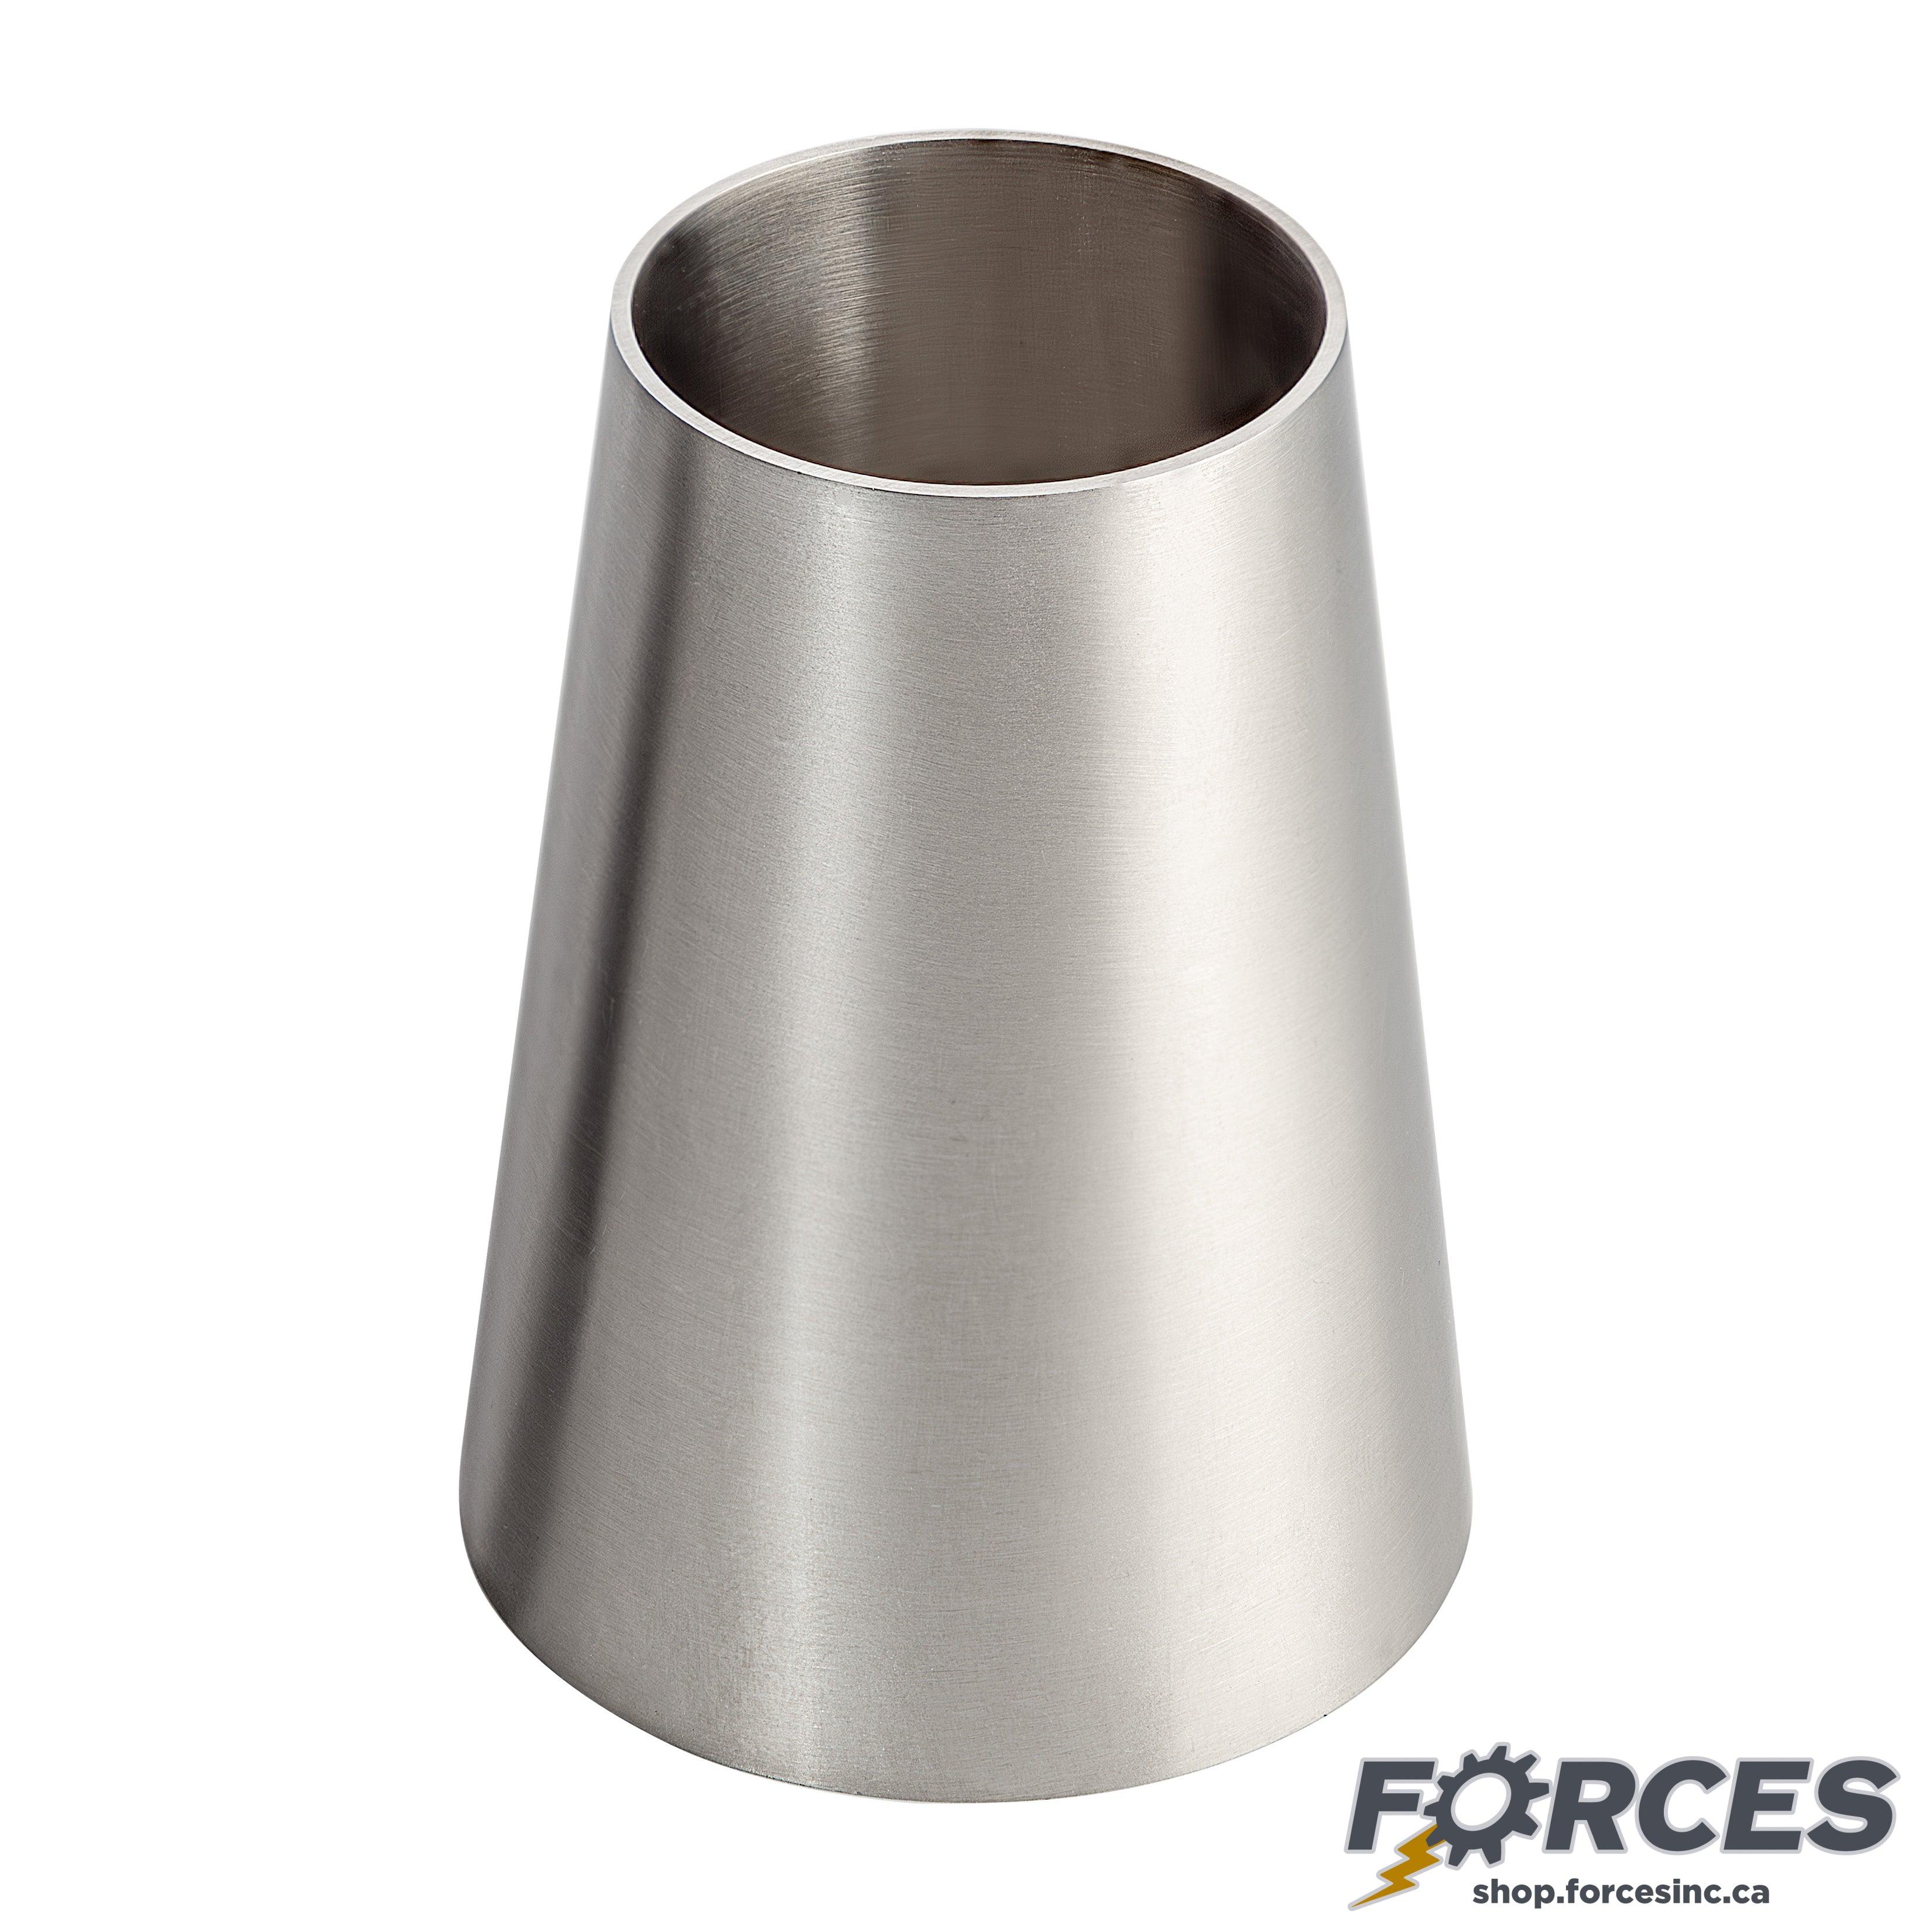 3" x 2" Butt Weld Concentric Reducer - Stainless Steel 304 - Forces Inc